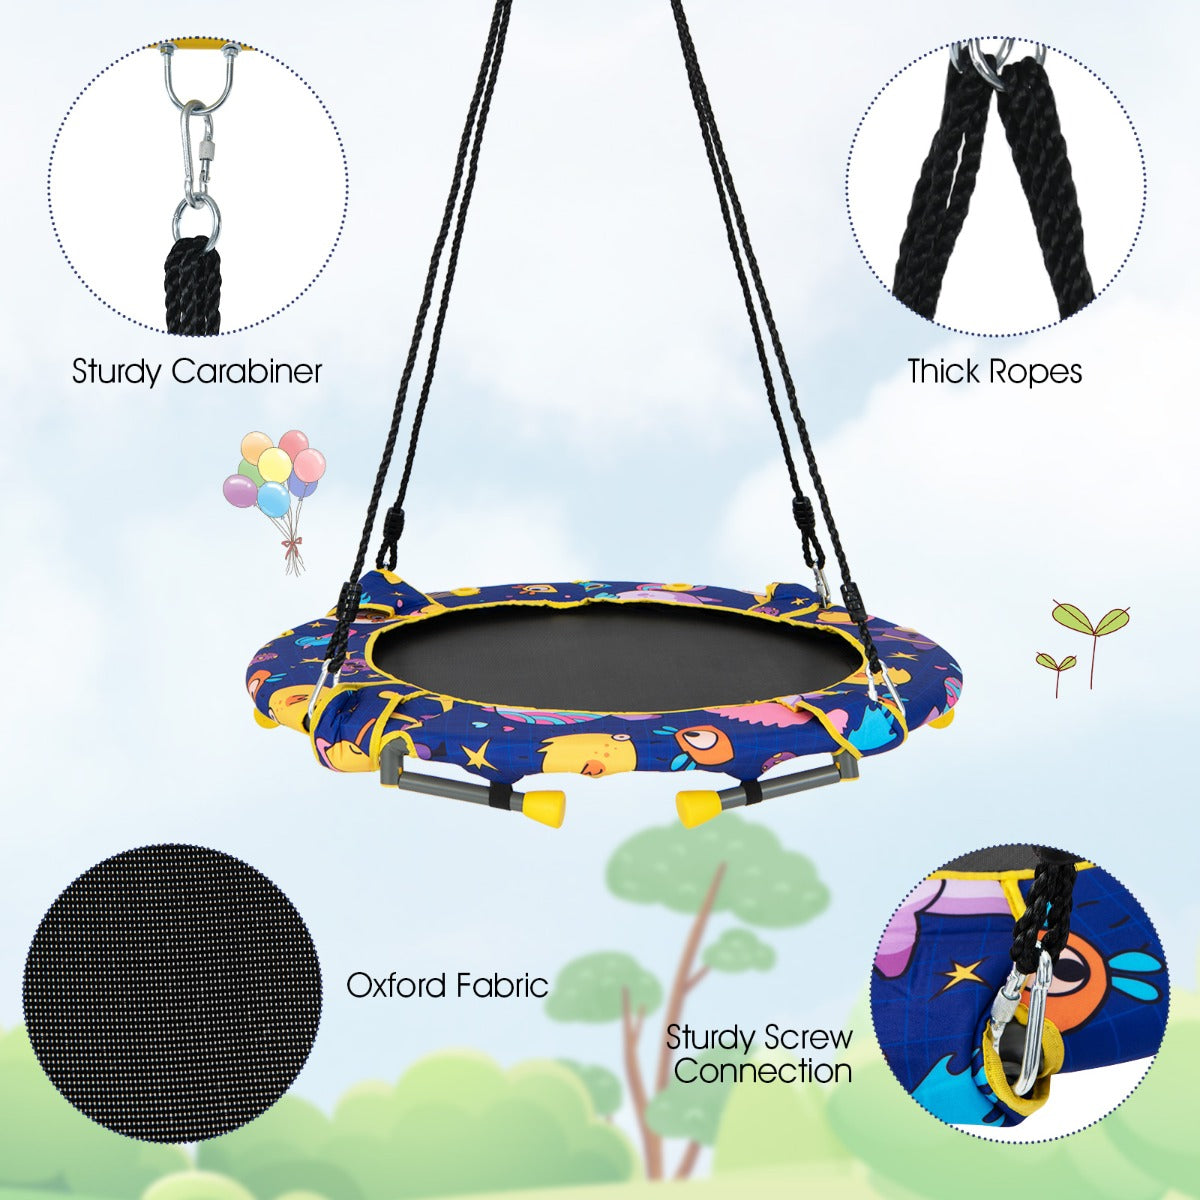 1Play and Bounce Bliss: Convertible Swing and Trampoline Set with Upholstered Handrail for Kids